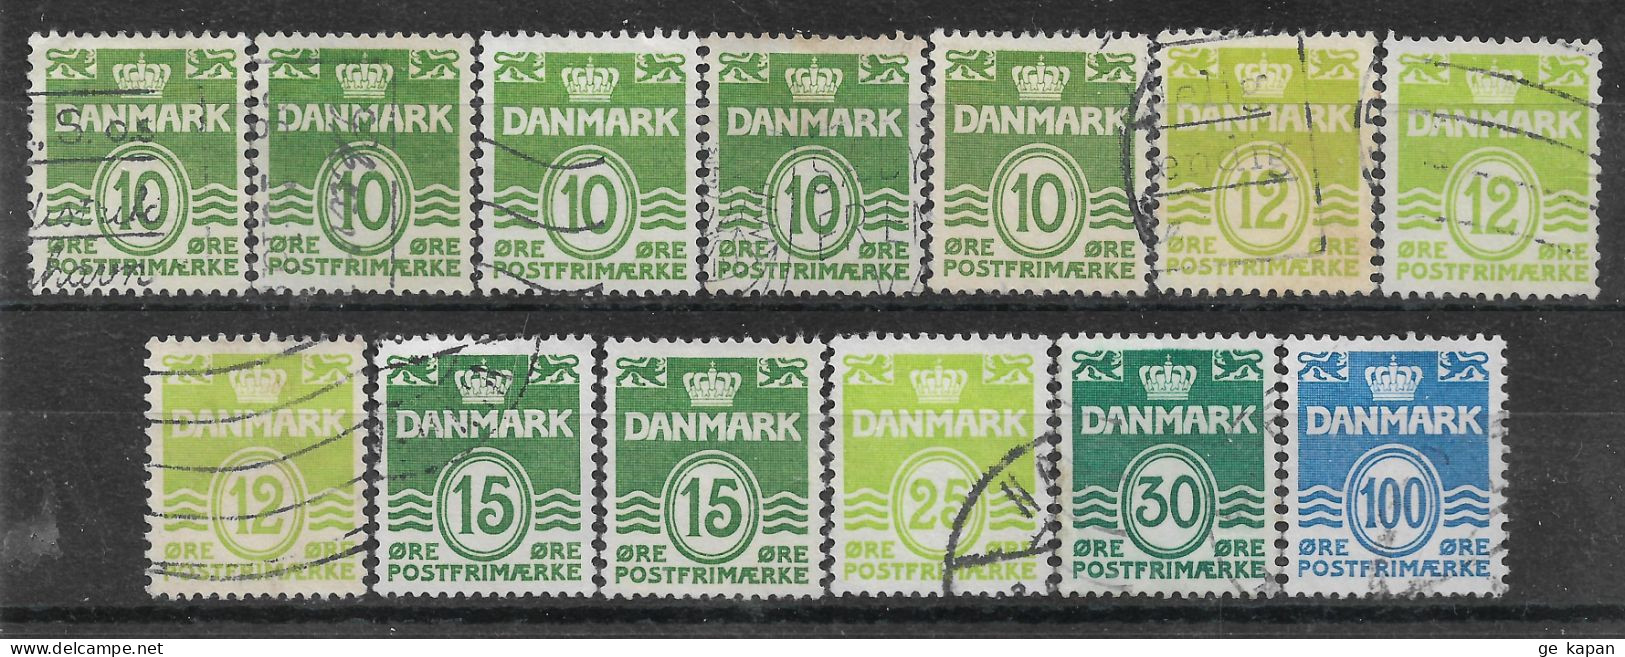 1950-1983 DENMARK Set Of 13 USED STAMPS (Michel # 328x,332x,410x,427x,456y,774) - Used Stamps